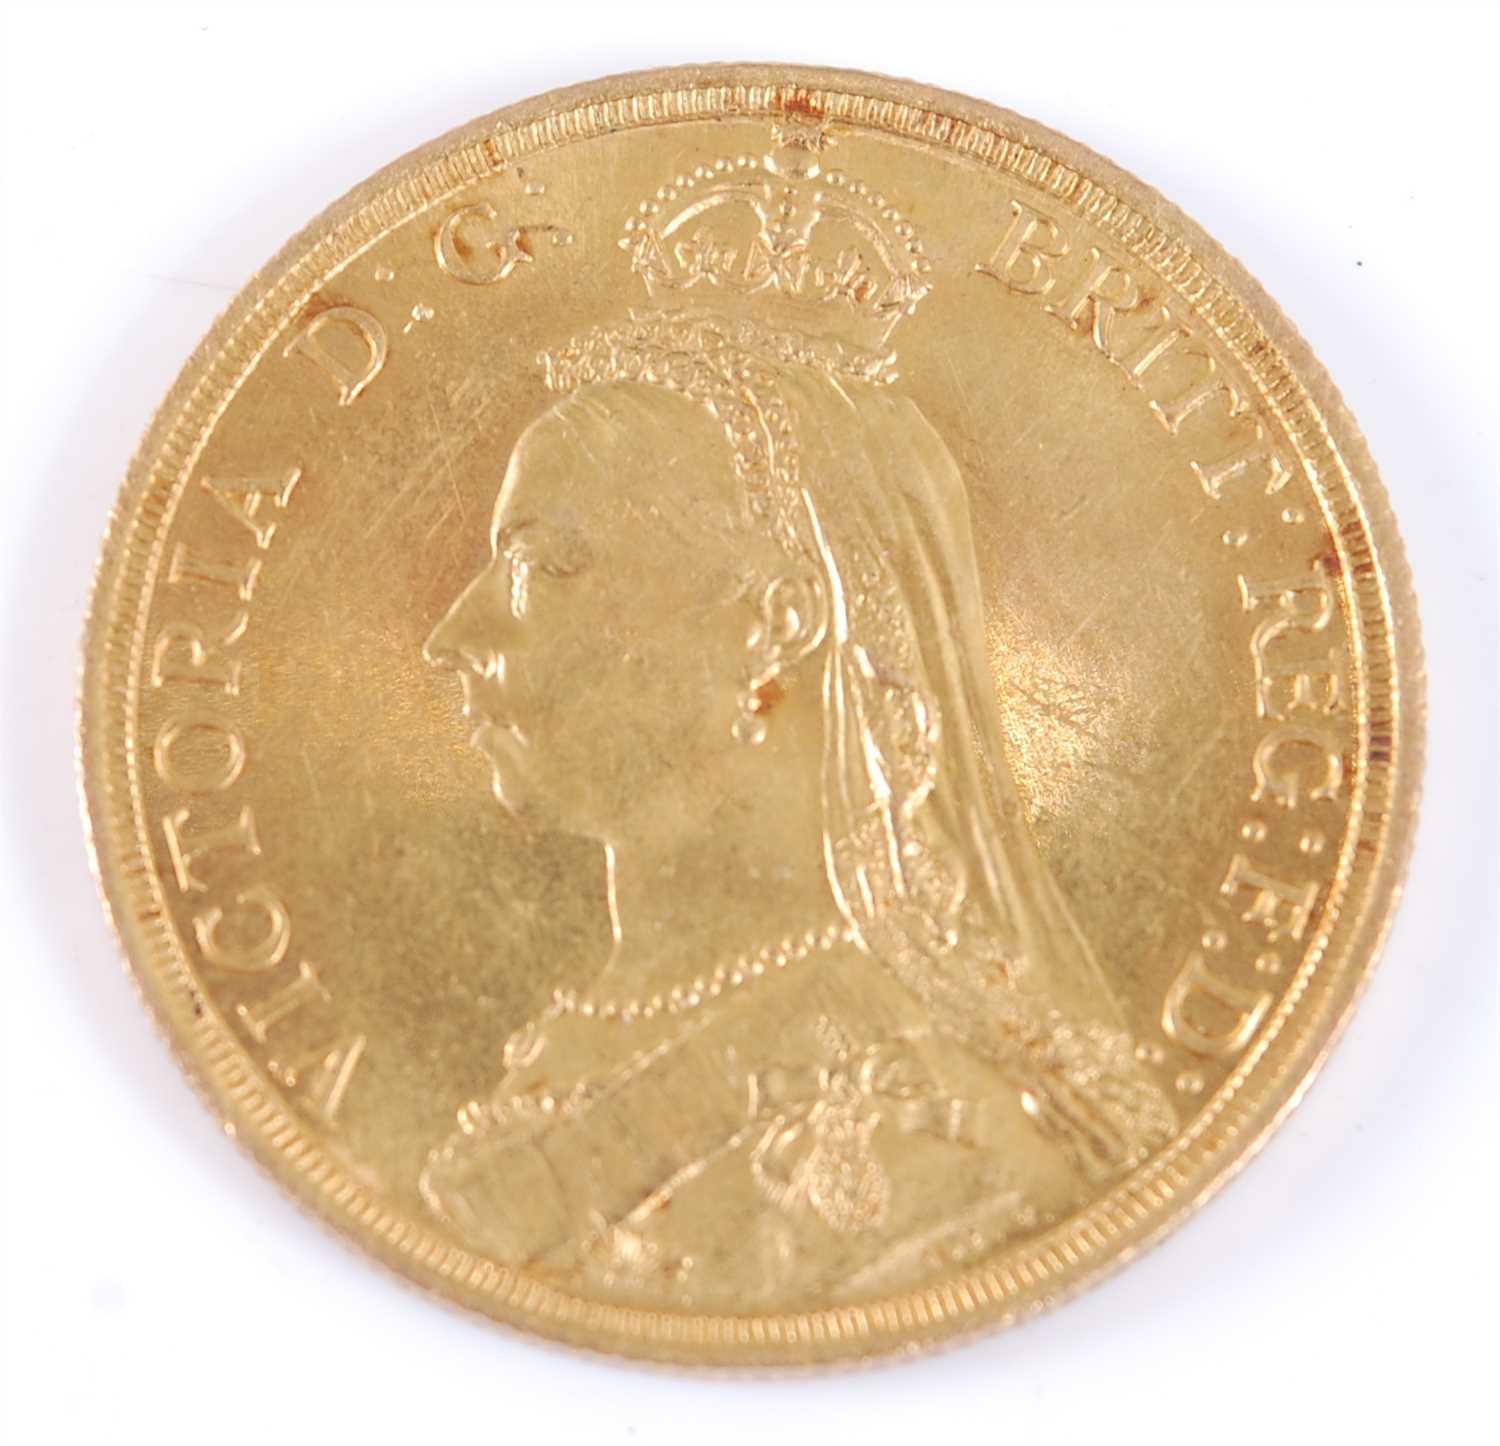 Lot 2192 - Great Britain, 1887 gold two pound coin